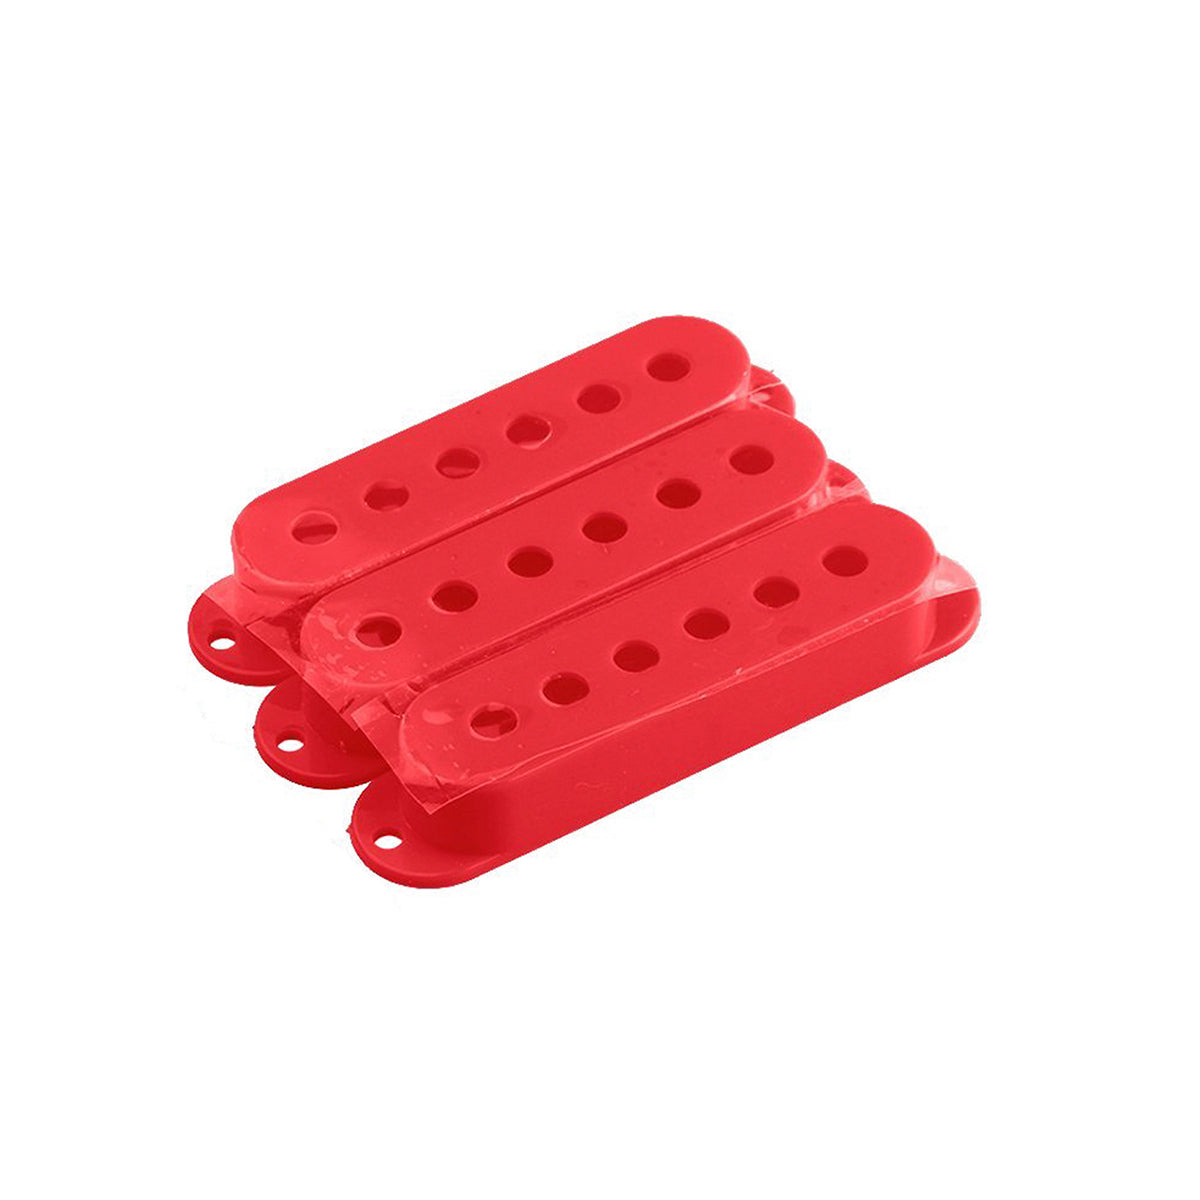 Musiclily 52mm Plastic Strat Style Guitar Single Coil Pickup Cover Set, Red( 3 Pieces)